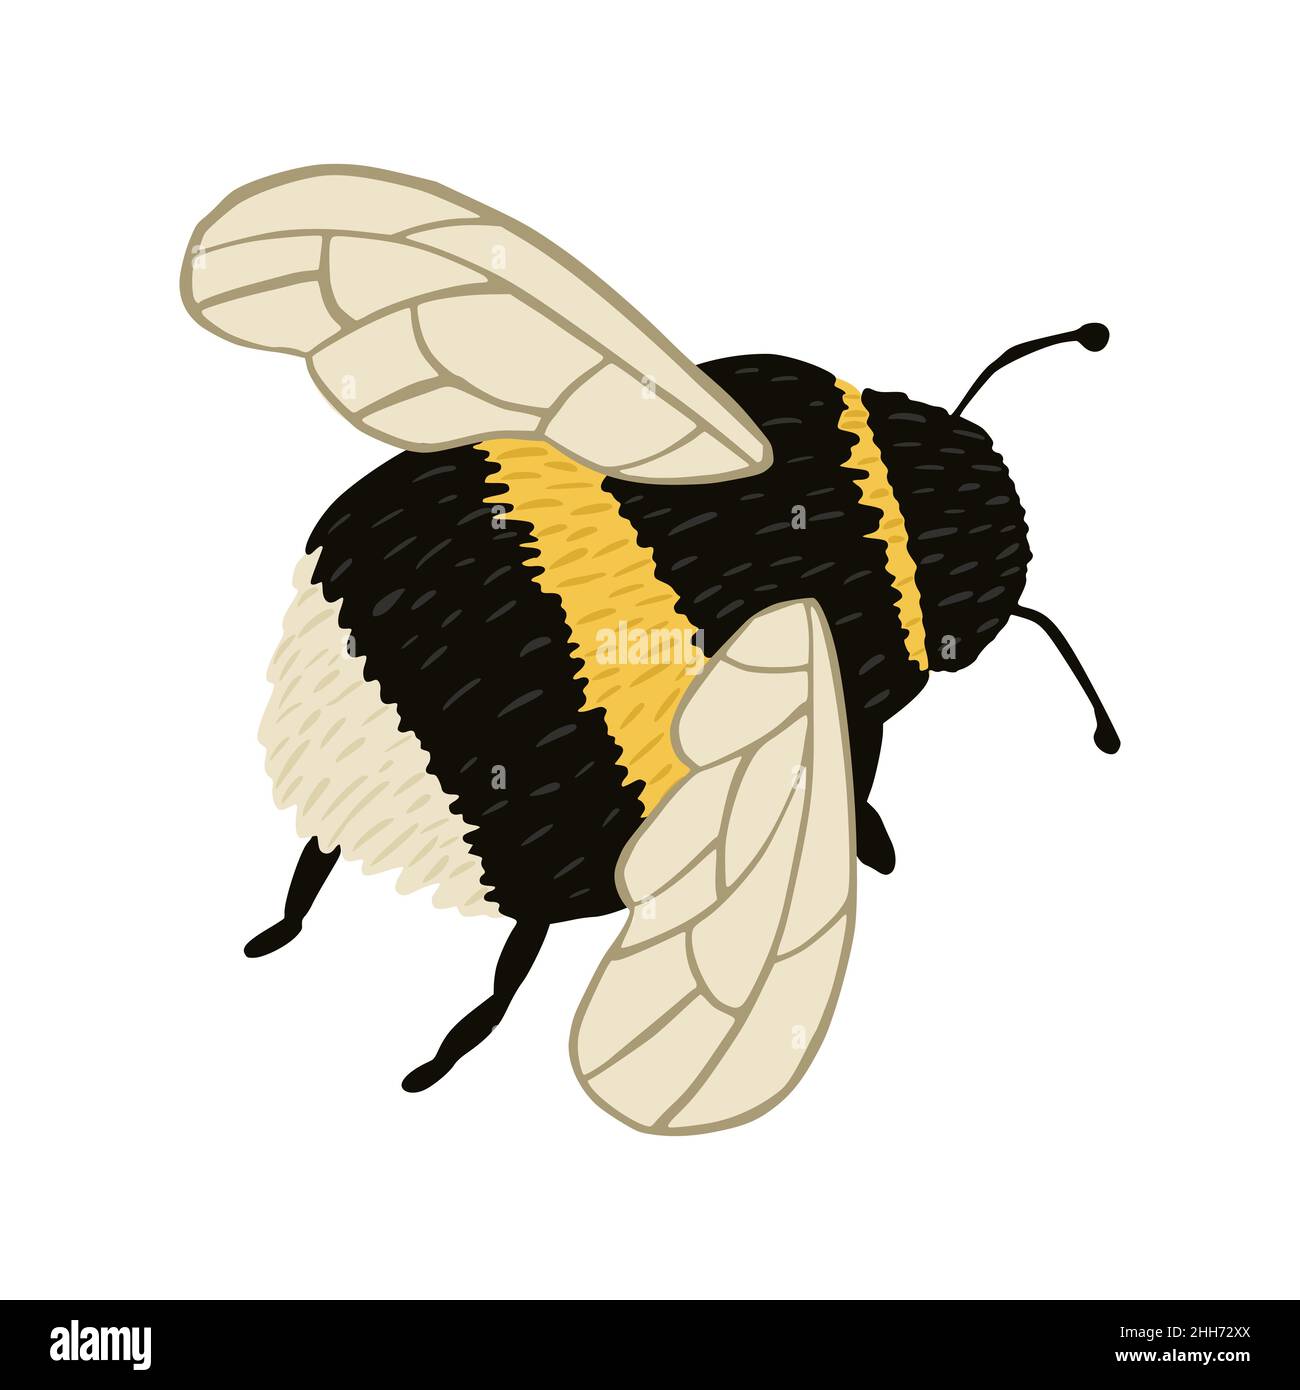 Bumblebee isolated on white background. Abstract insect for pollination in black and yellow color in doodle style vector illustration. Stock Vector